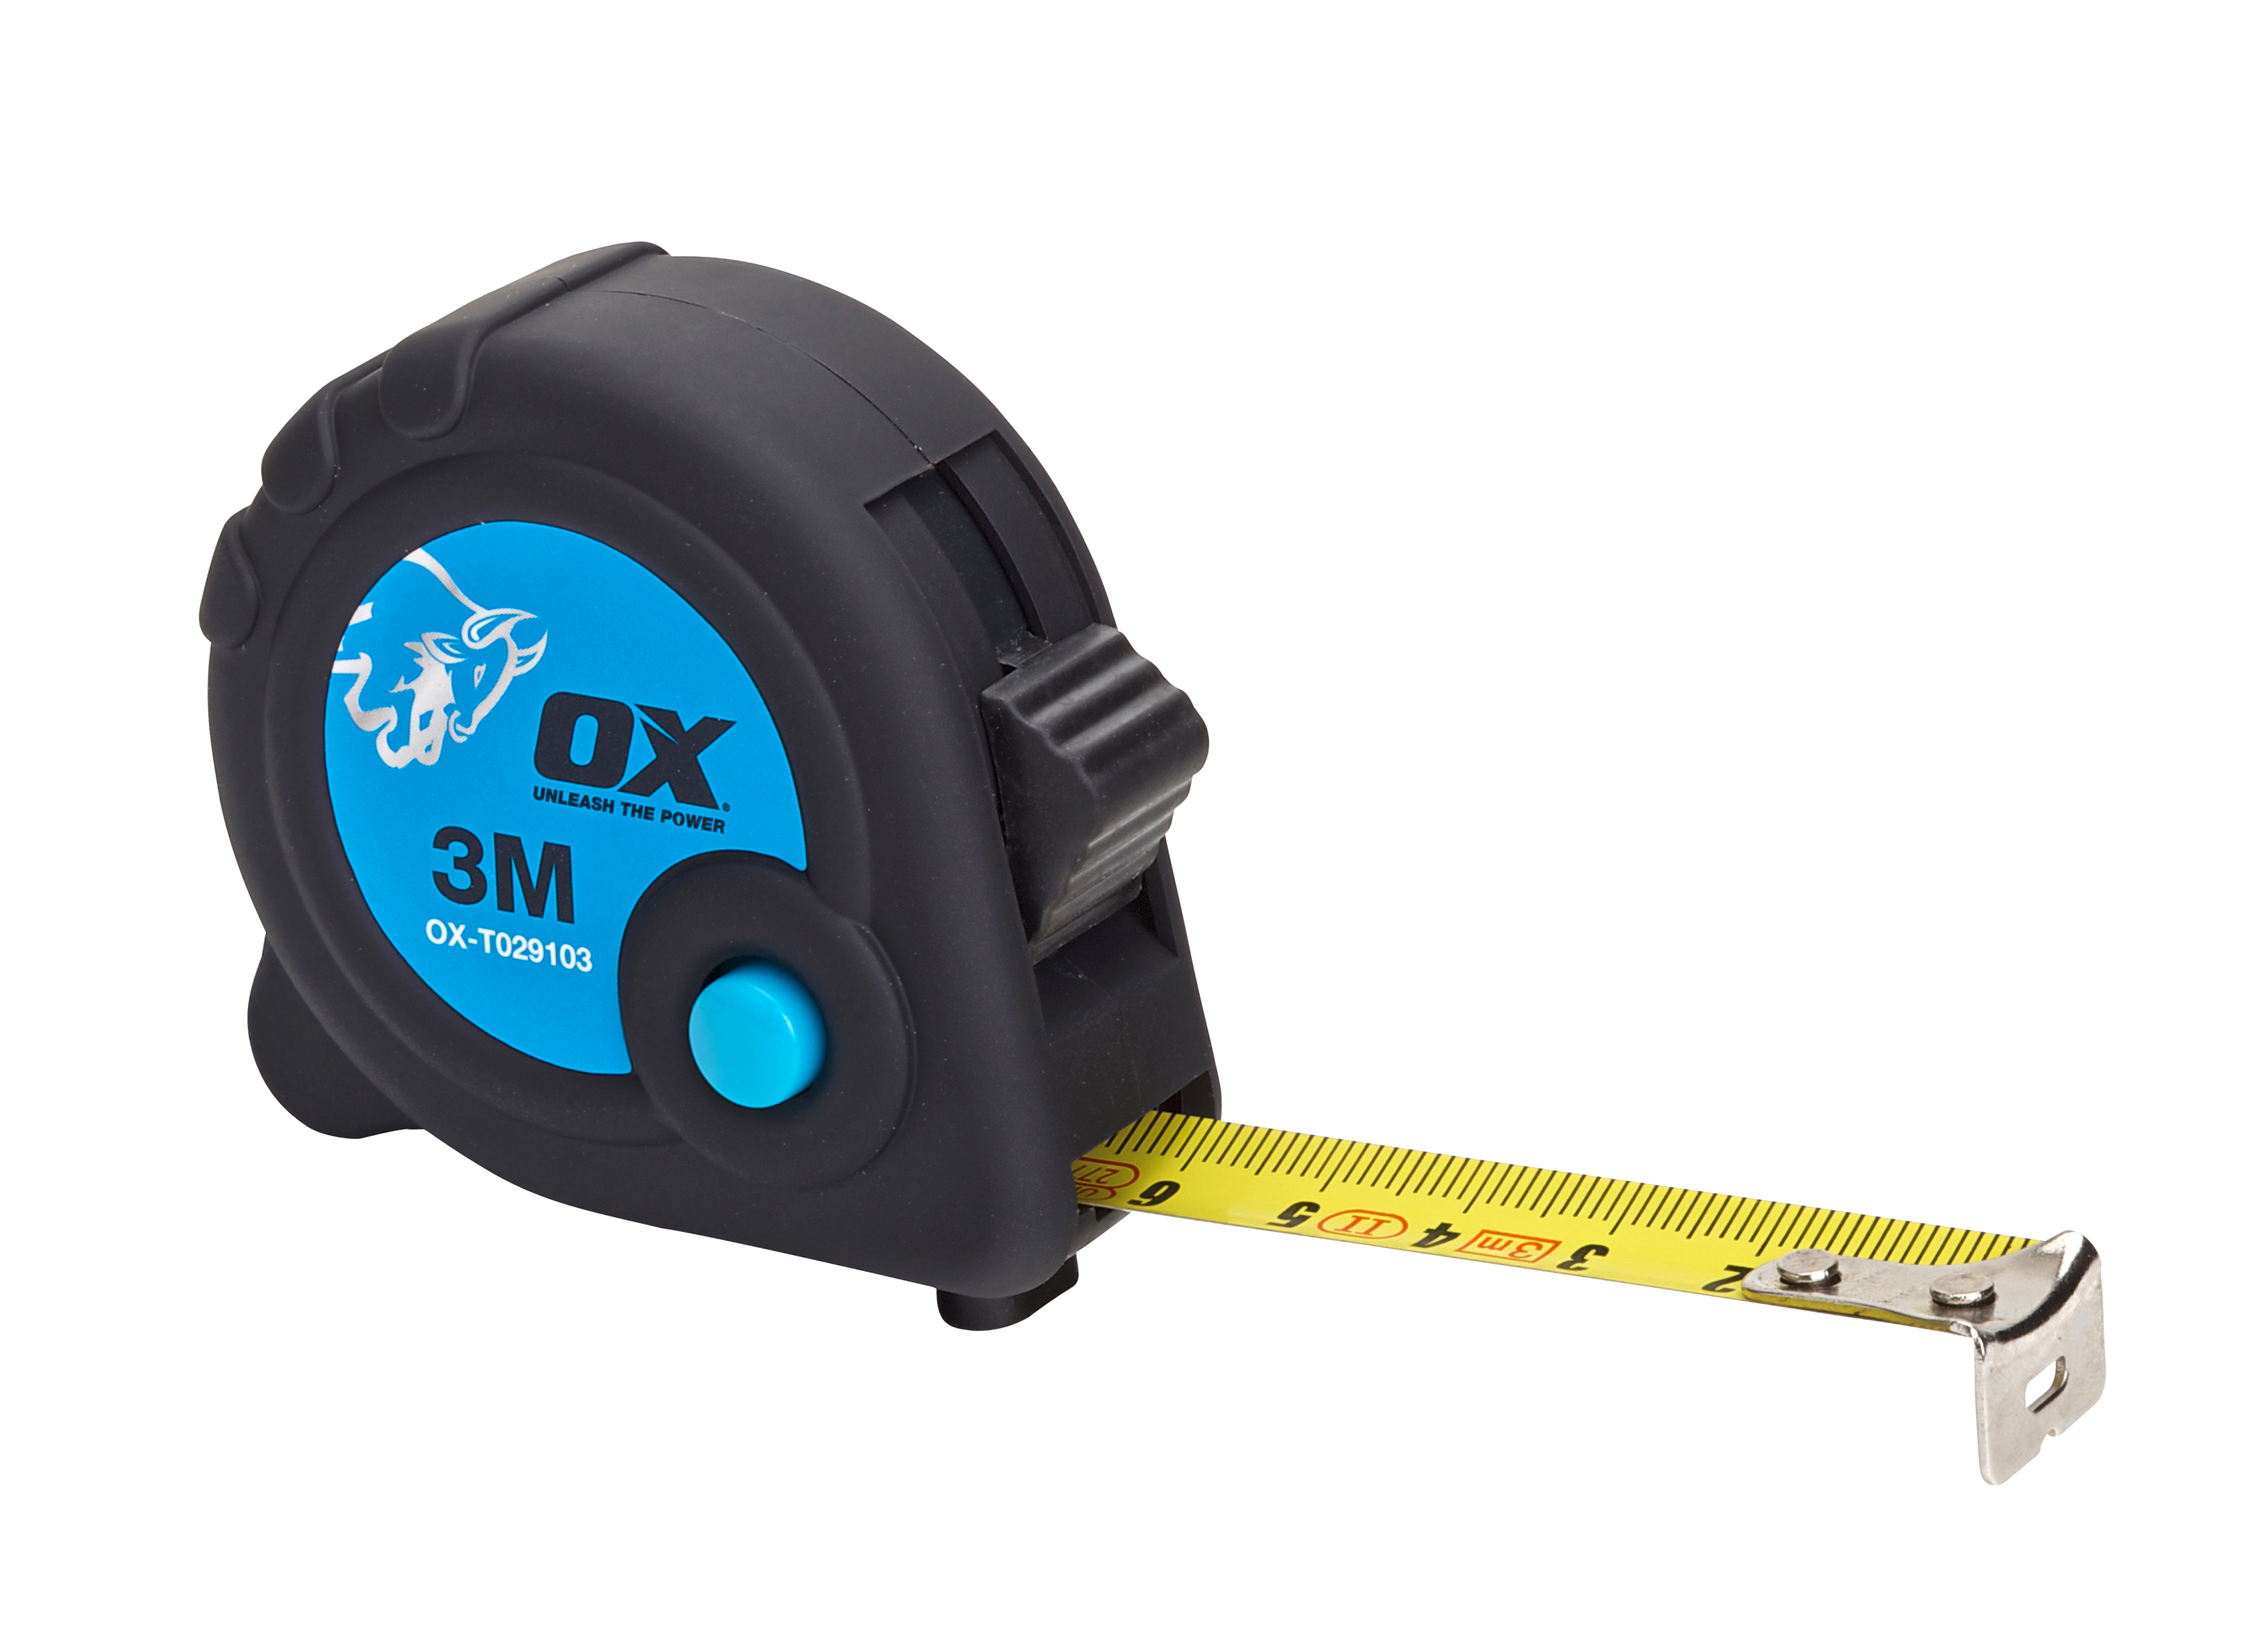 OX Trade 3m Tape Measure - Metric Only